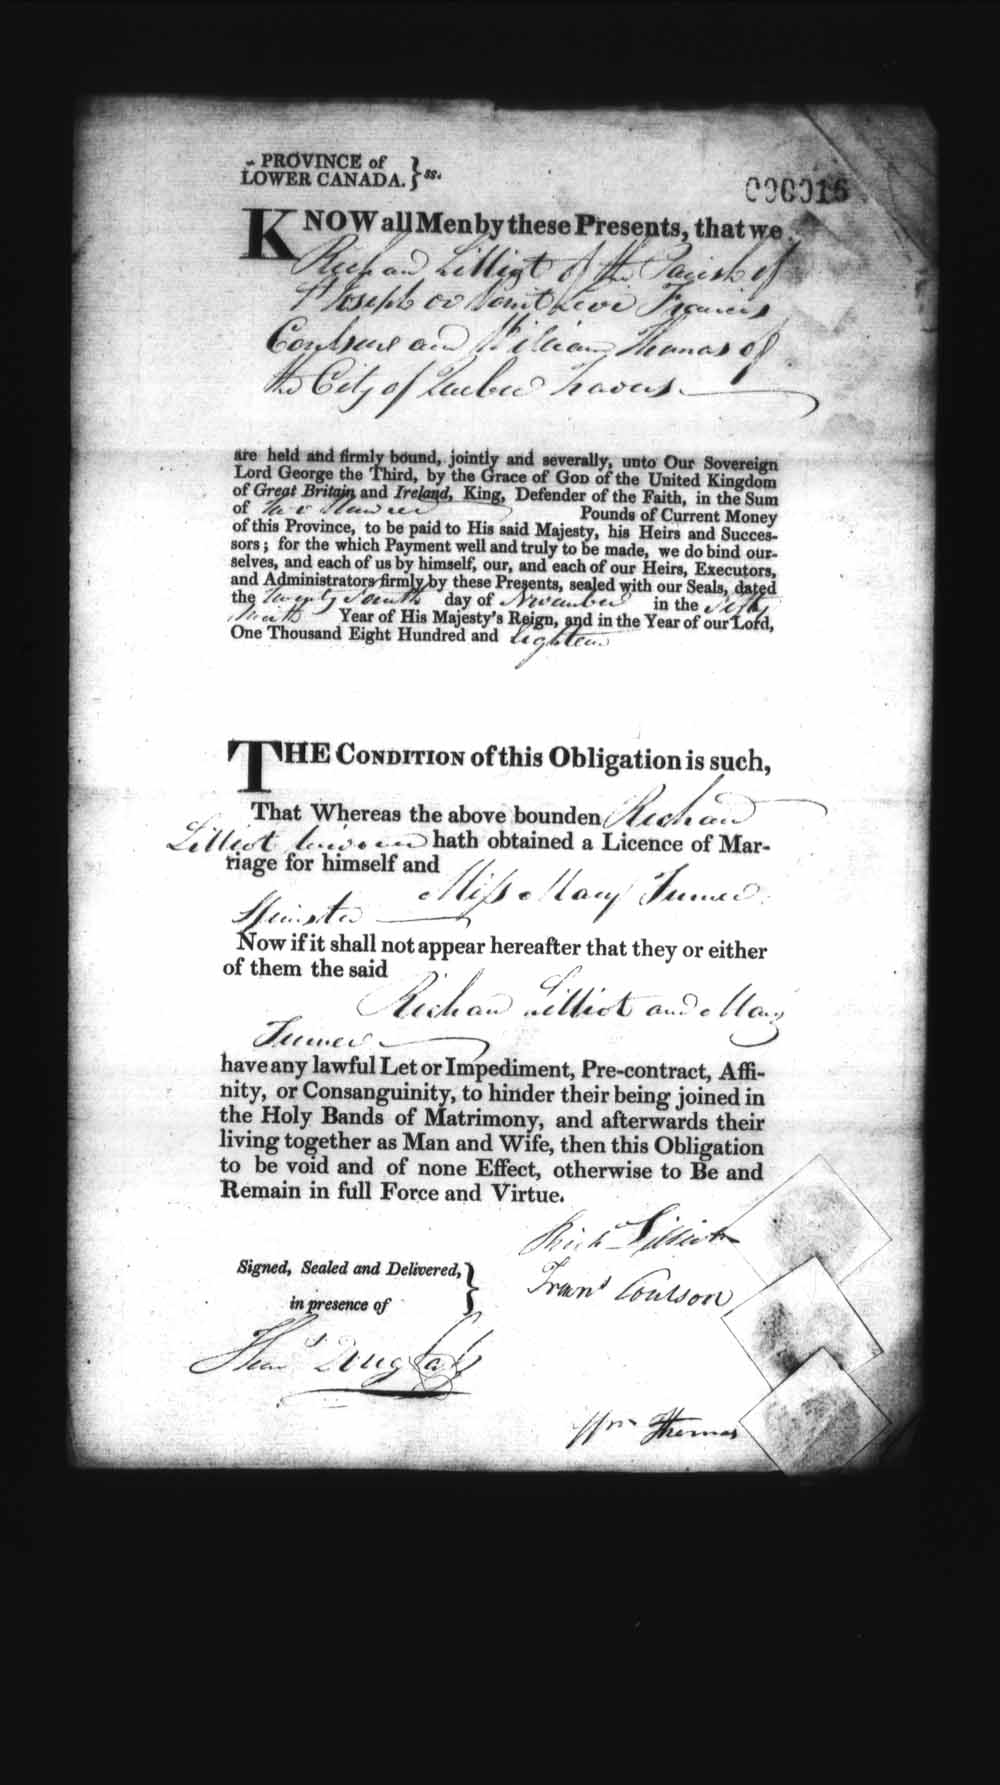 Digitized page of Upper and Lower Canada Marriage Bonds (1779-1865) for Image No.: e008235825